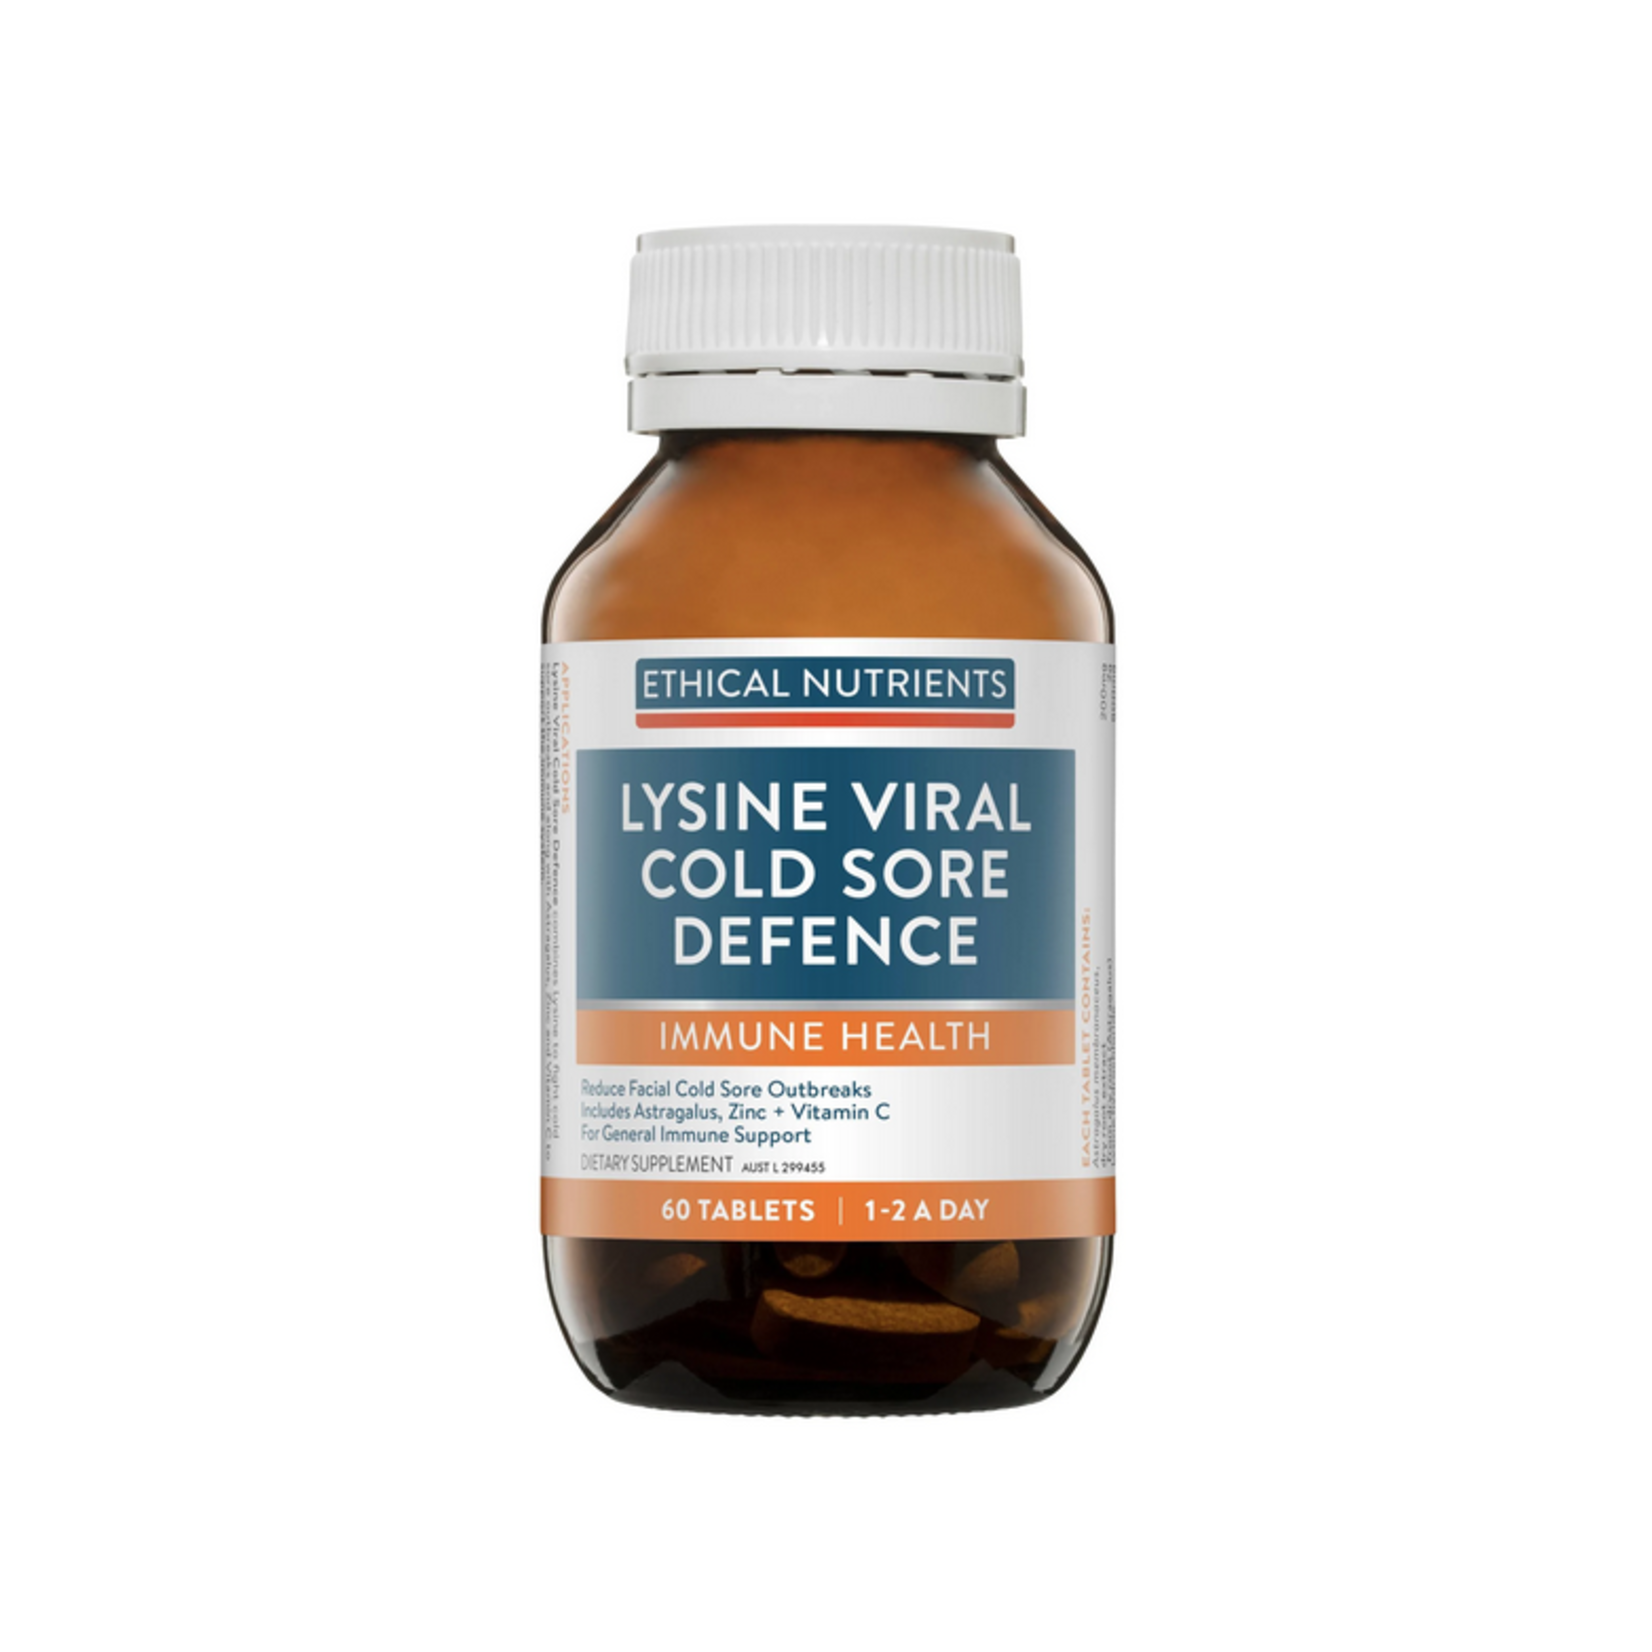 ETHICAL NUTRIENTS Ethical Nutrients Lysine Viral Cold Sore Defence 60 tabs